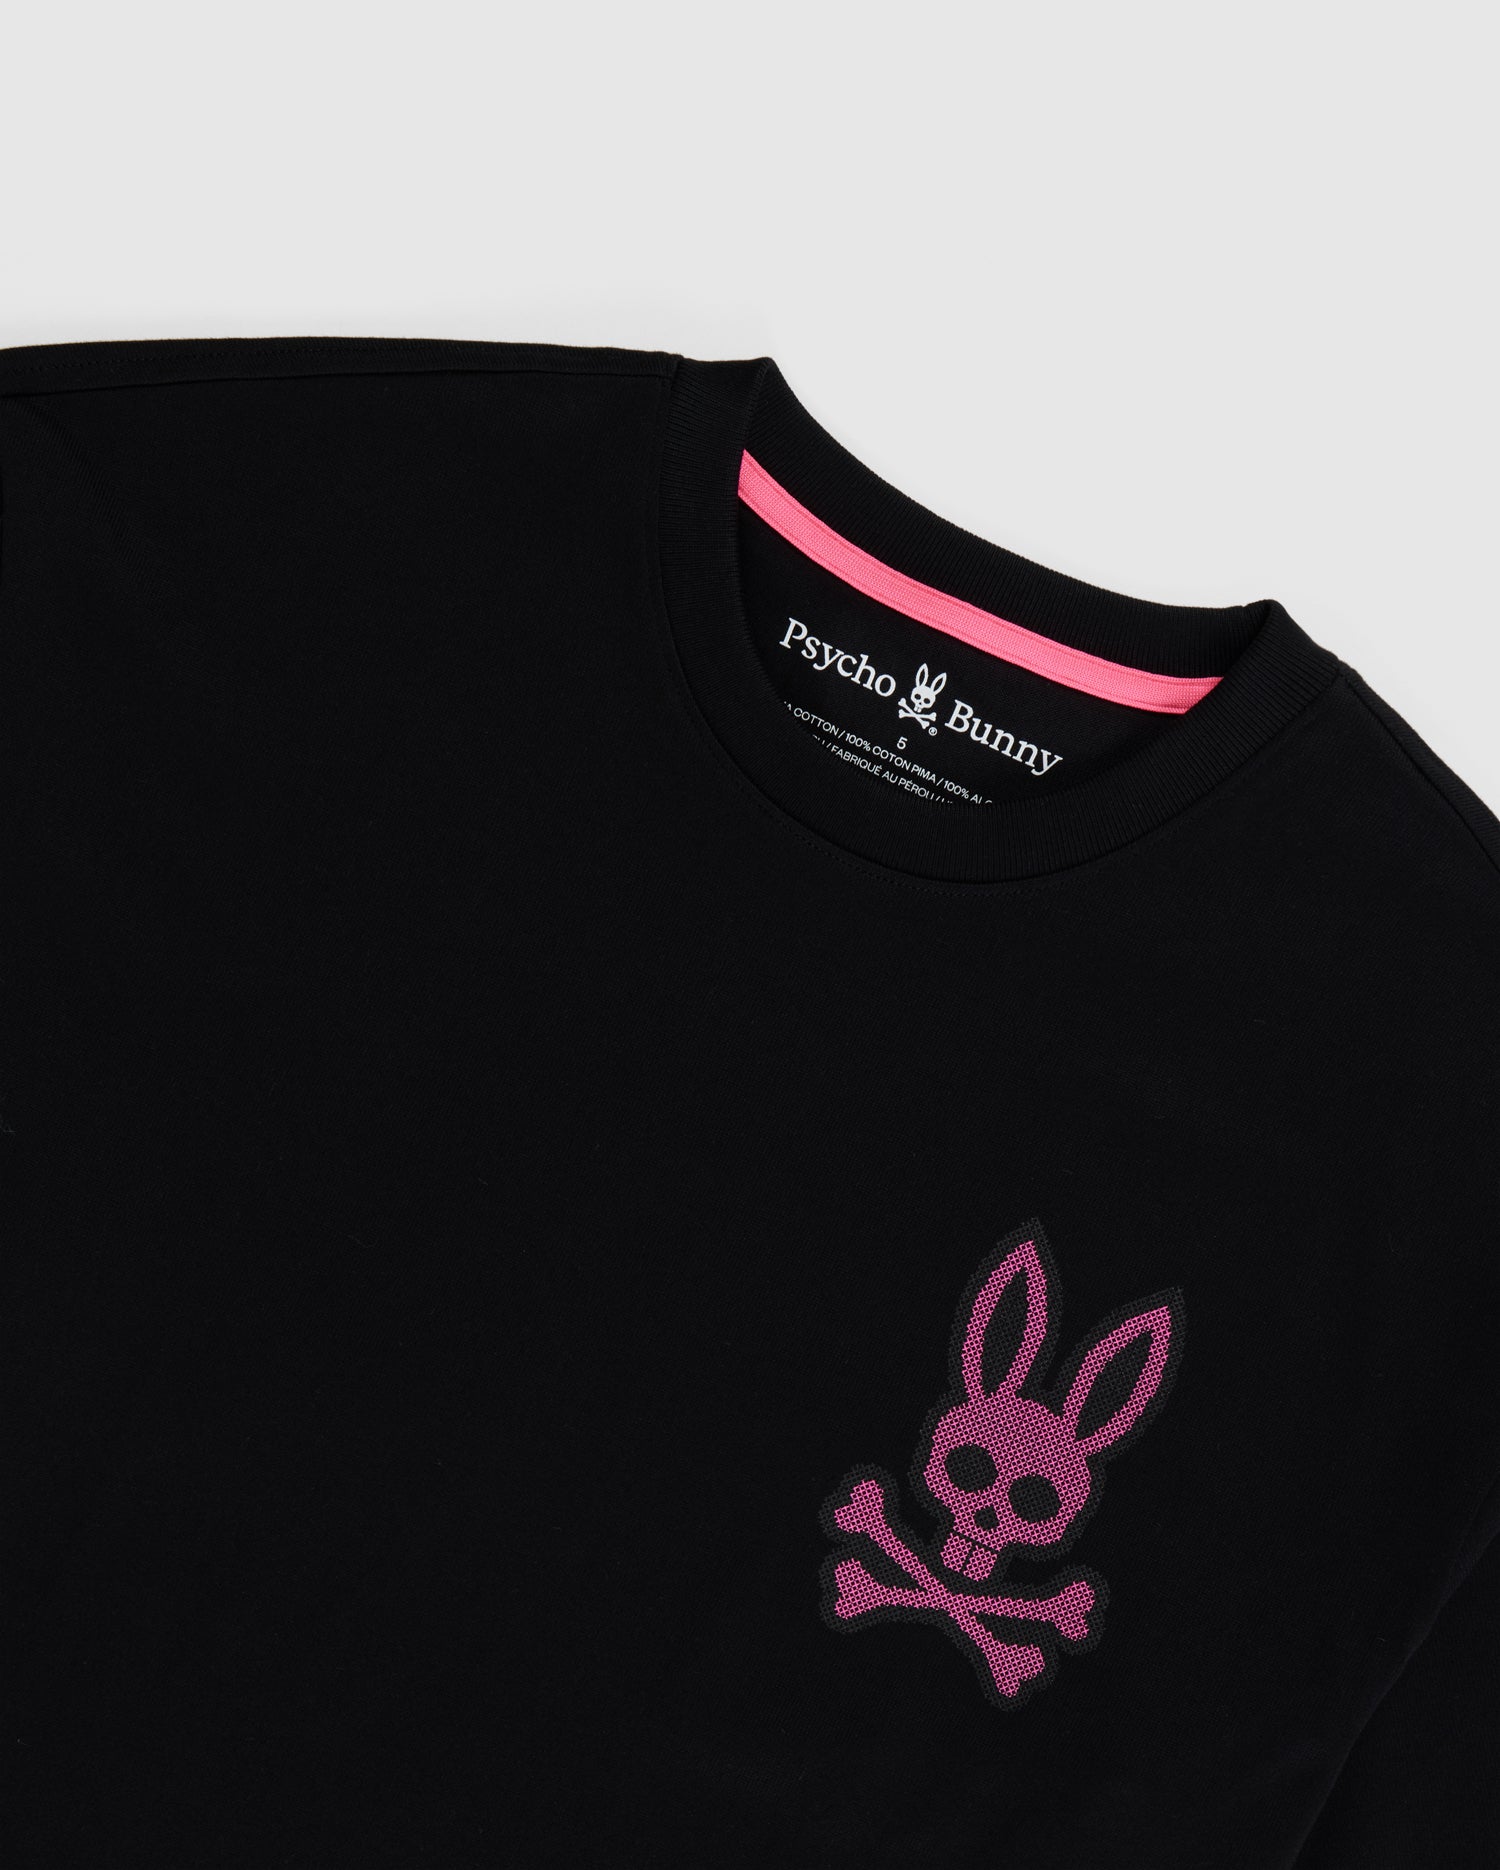 MENS BLACK LANCASTER HEAVY WEIGHT CROSS STITCHED BUNNY TEE | PSYCHO ...